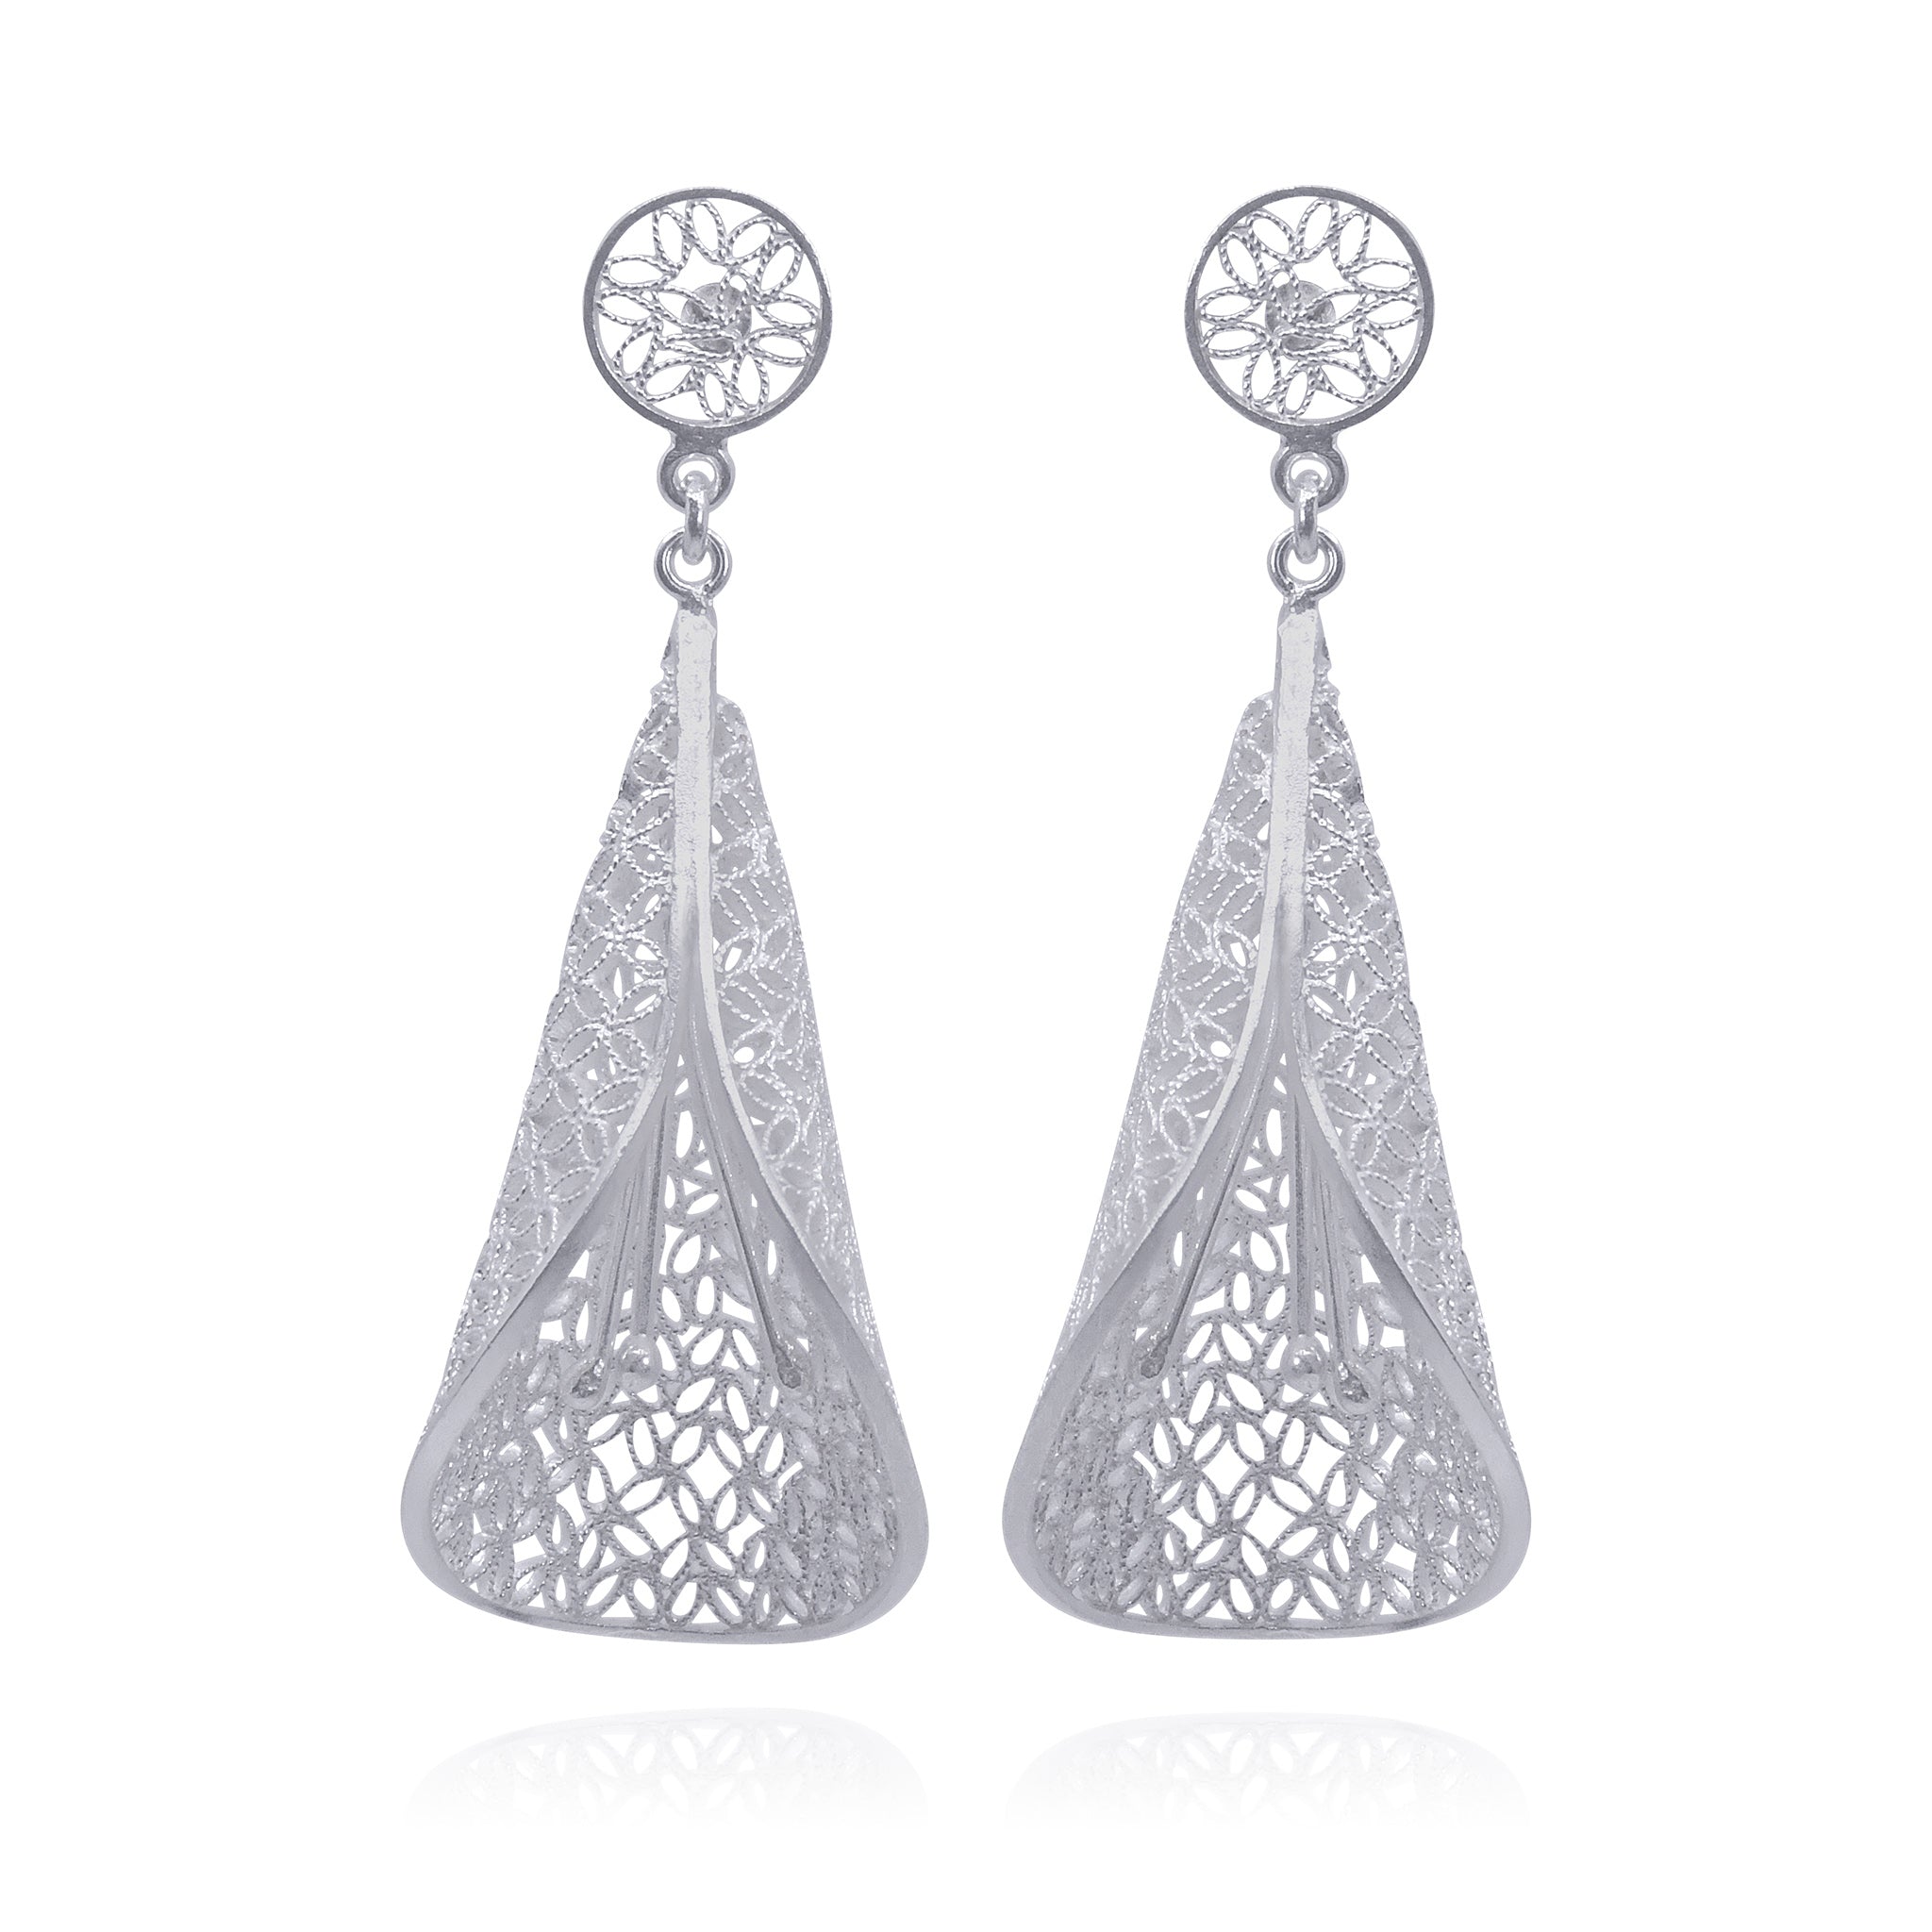 CALLA LILY SILVER LARGE EARRINGS FILIGREE